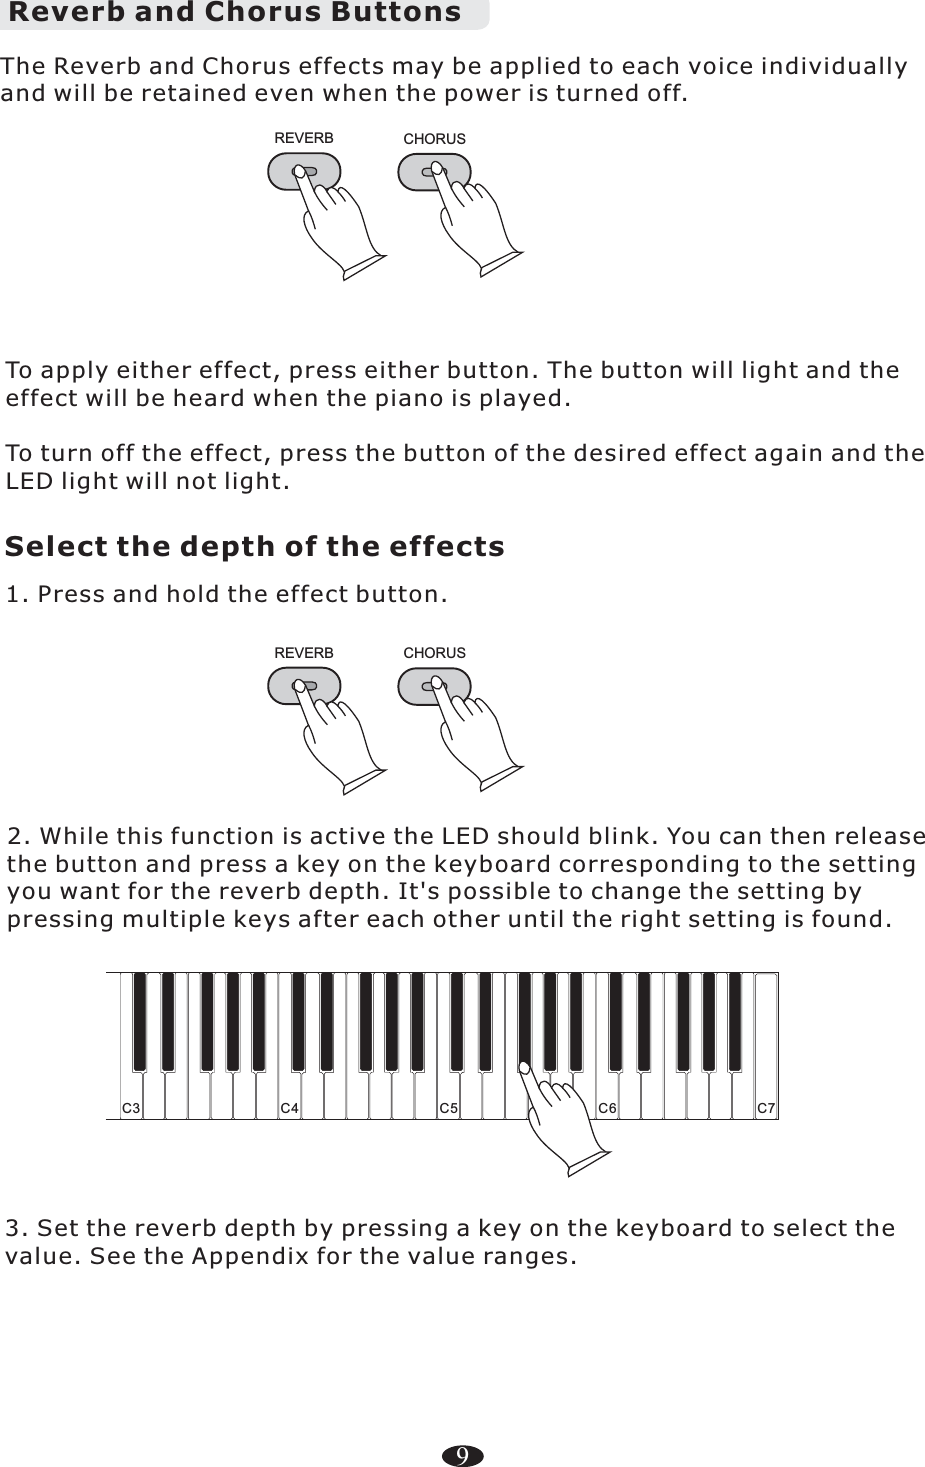 9Reverb and Chorus ButtonsTo apply either effect, press either button. The button will light and the effect will be heard when the piano is played.To turn off the effect, press the button of the desired effect again and the LED light will not light. REVERB3. Set the reverb depth by pressing a key on the keyboard to select the value. See the Appendix for the value ranges.C4 C5 C6 C7C3The Reverb and Chorus effects may be applied to each voice individually and will be retained even when the power is turned off.CHORUSSelect the depth of the effects1. Press and hold the effect button.REVERB CHORUS2. While this function is active the LED should blink. You can then release the button and press a key on the keyboard corresponding to the setting you want for the reverb depth. It&apos;s possible to change the setting by pressing multiple keys after each other until the right setting is found.